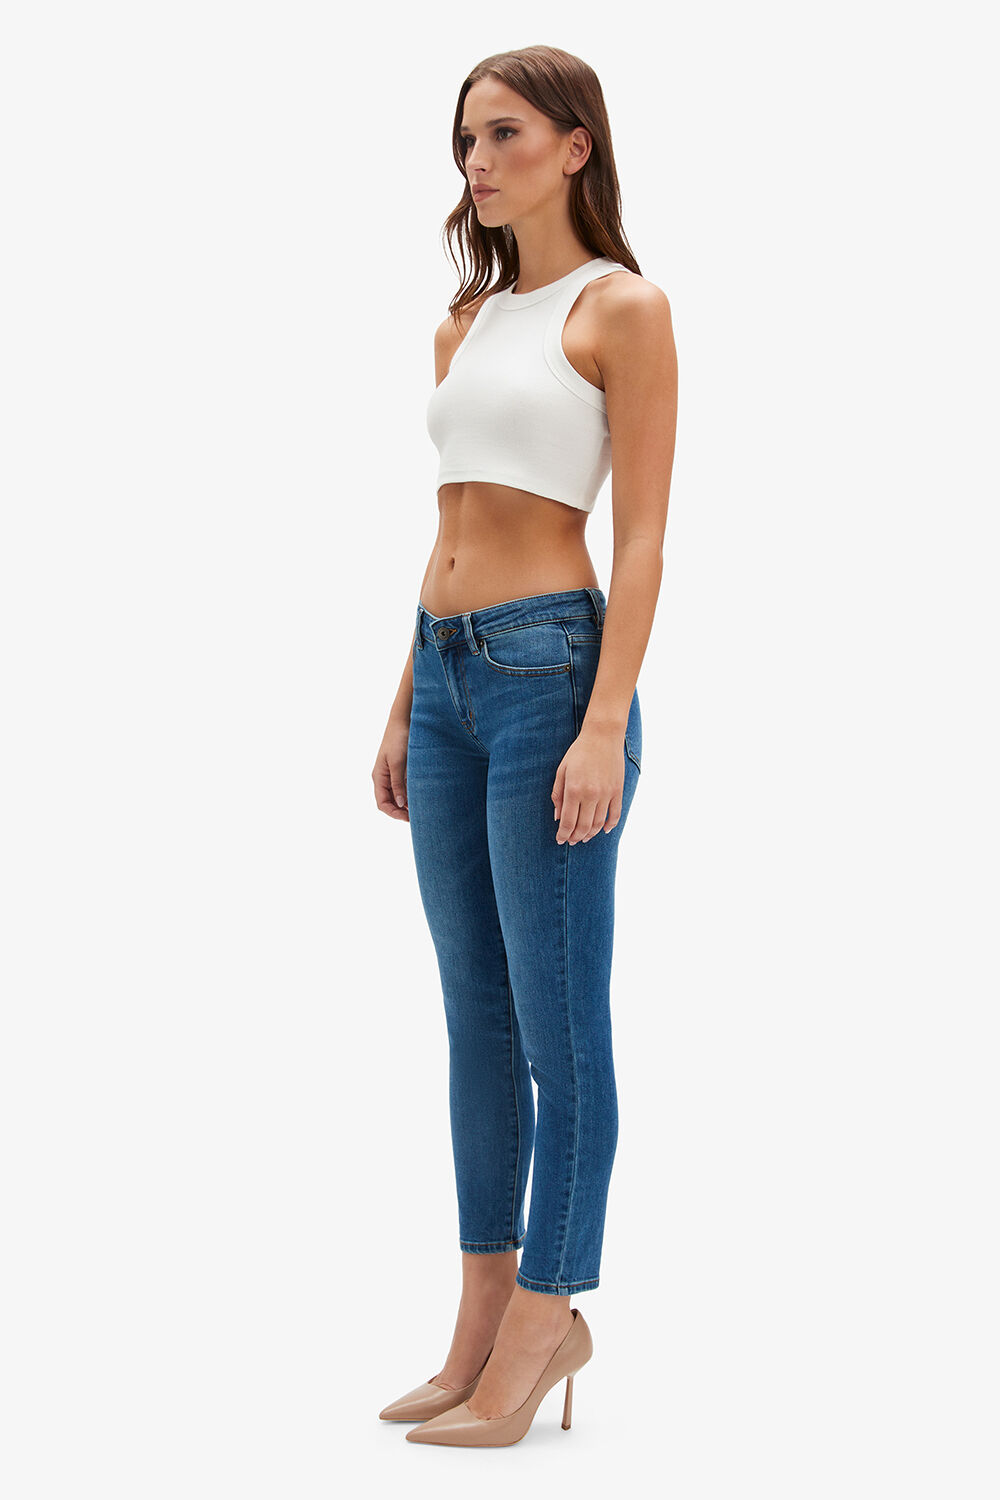 KNOX SKINNY CROPPED JEAN in colour CITADEL